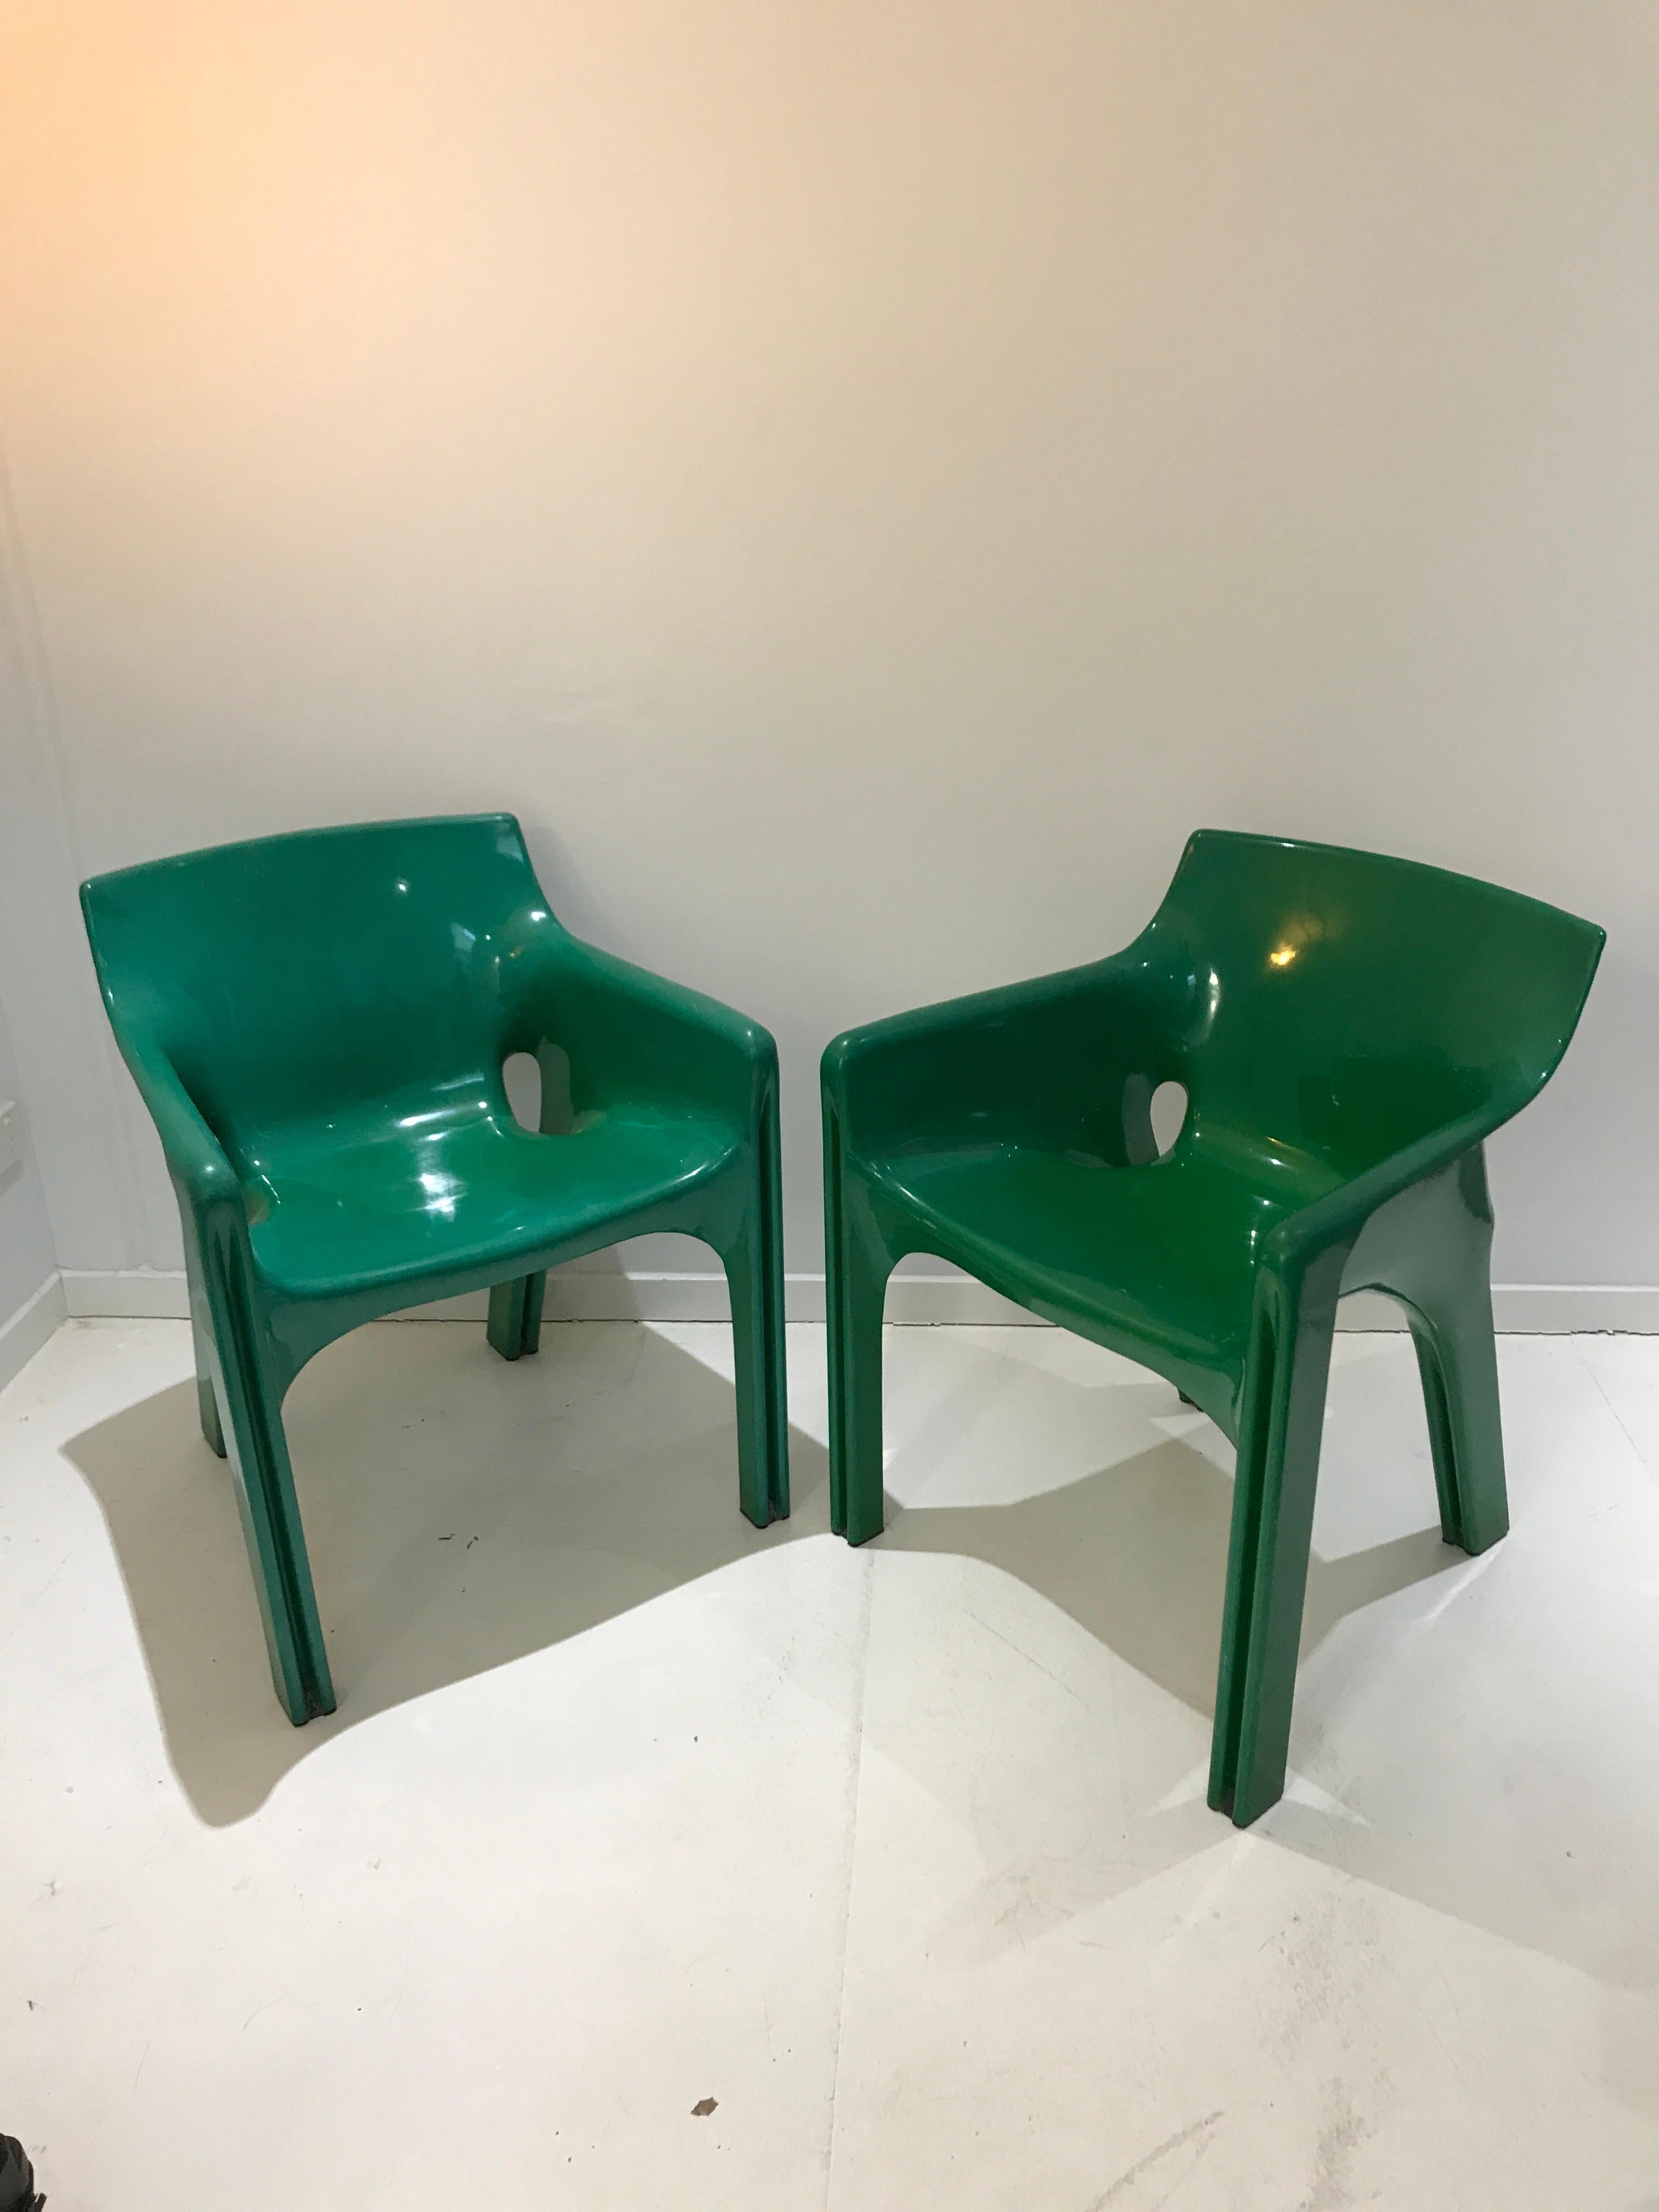 Late 20th Century Italian Mid-Century Modern Gaudi Chairs by Vico Magistretti for Artemide, 1970s